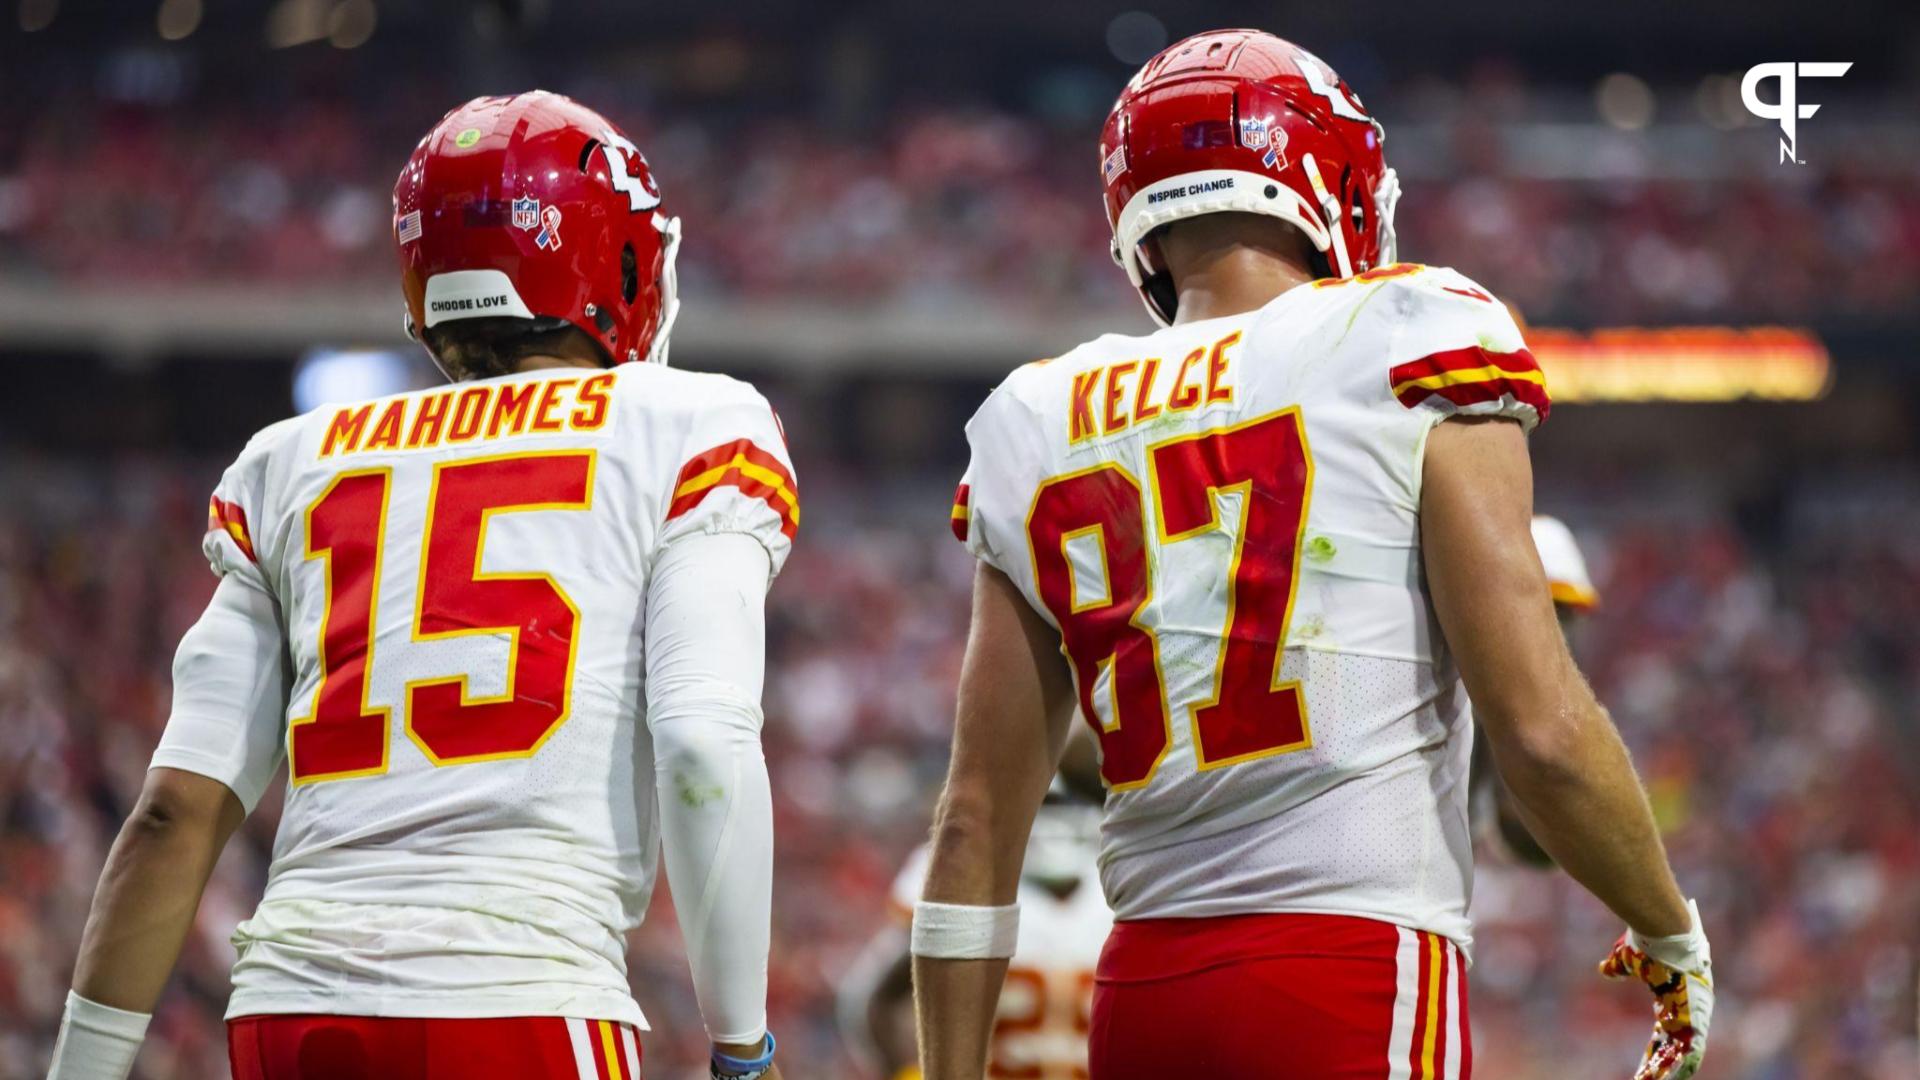 Tom Brady's One Word Reply to Patrick Mahomes and Travis Kelce Breaking His Record Goes Viral - "Beasts"